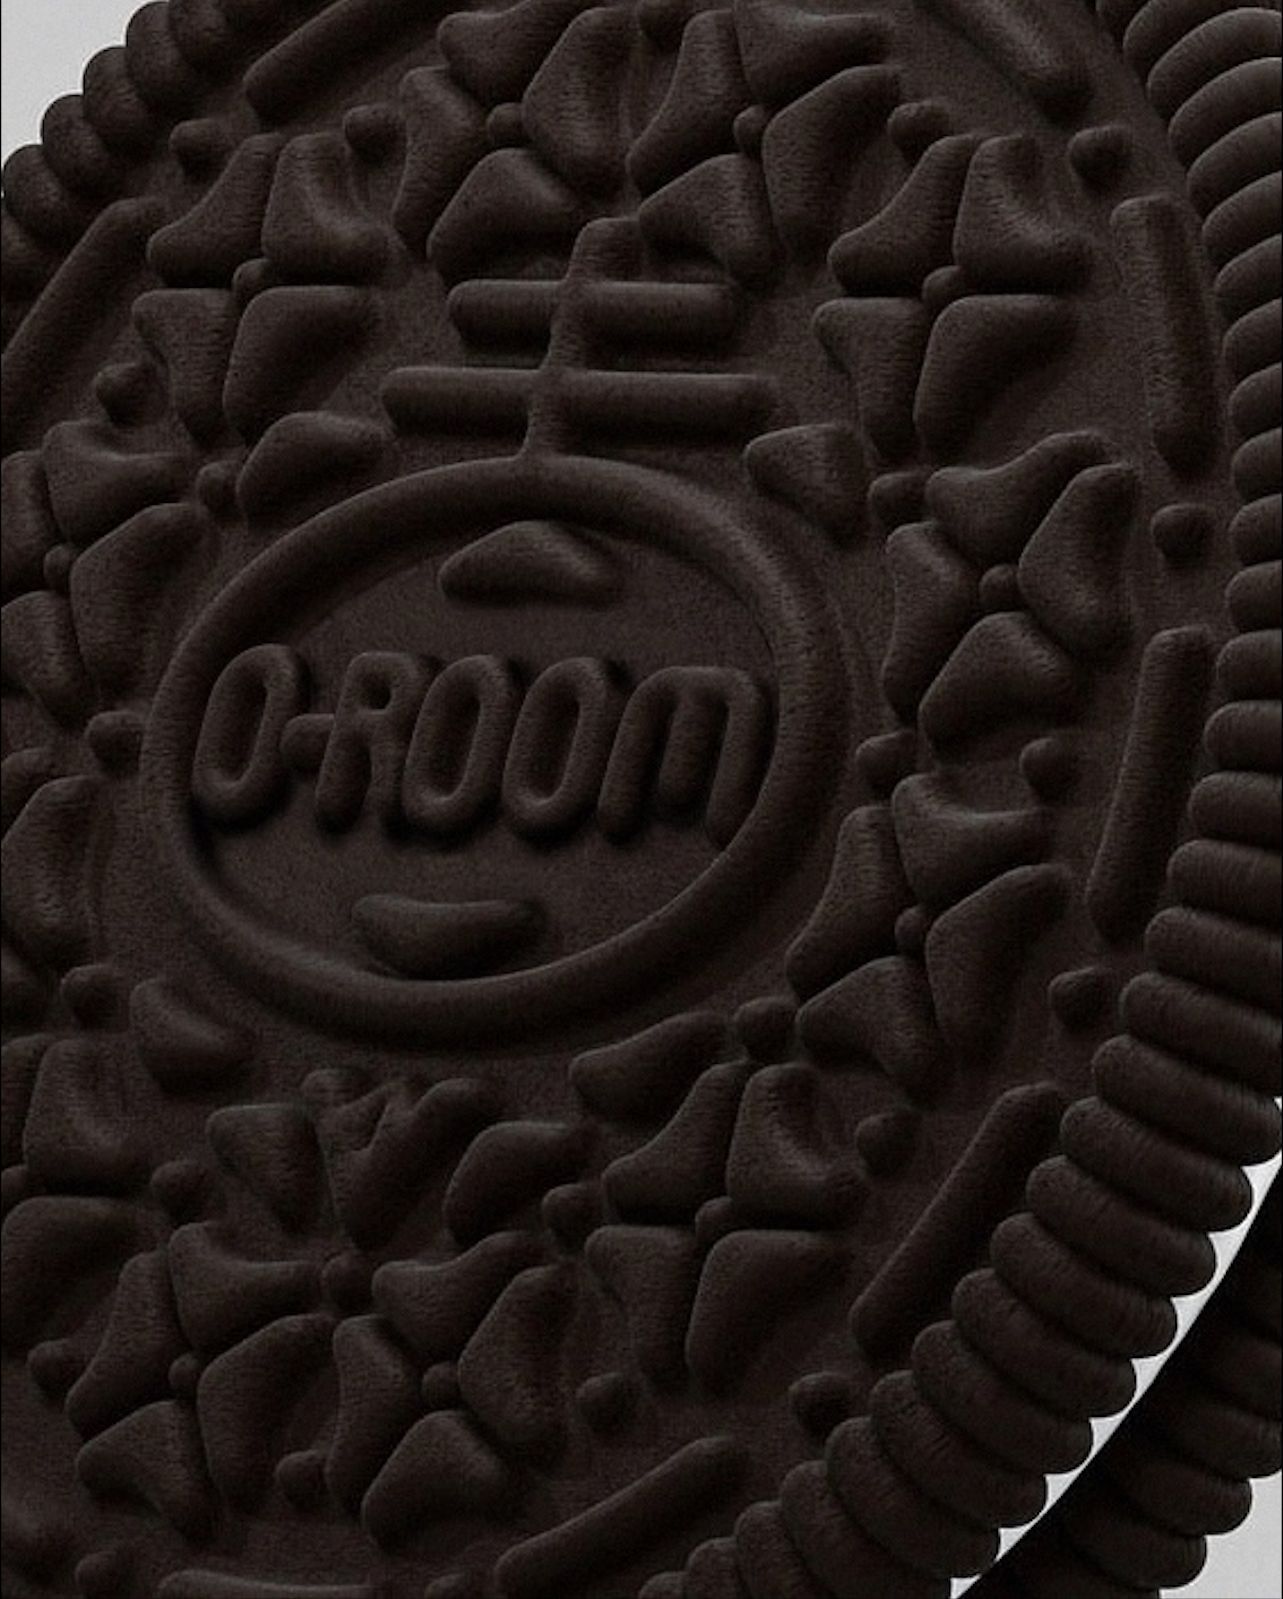 Close up of the embossed logo on the bottom of the Groom dog toy. - Oreo